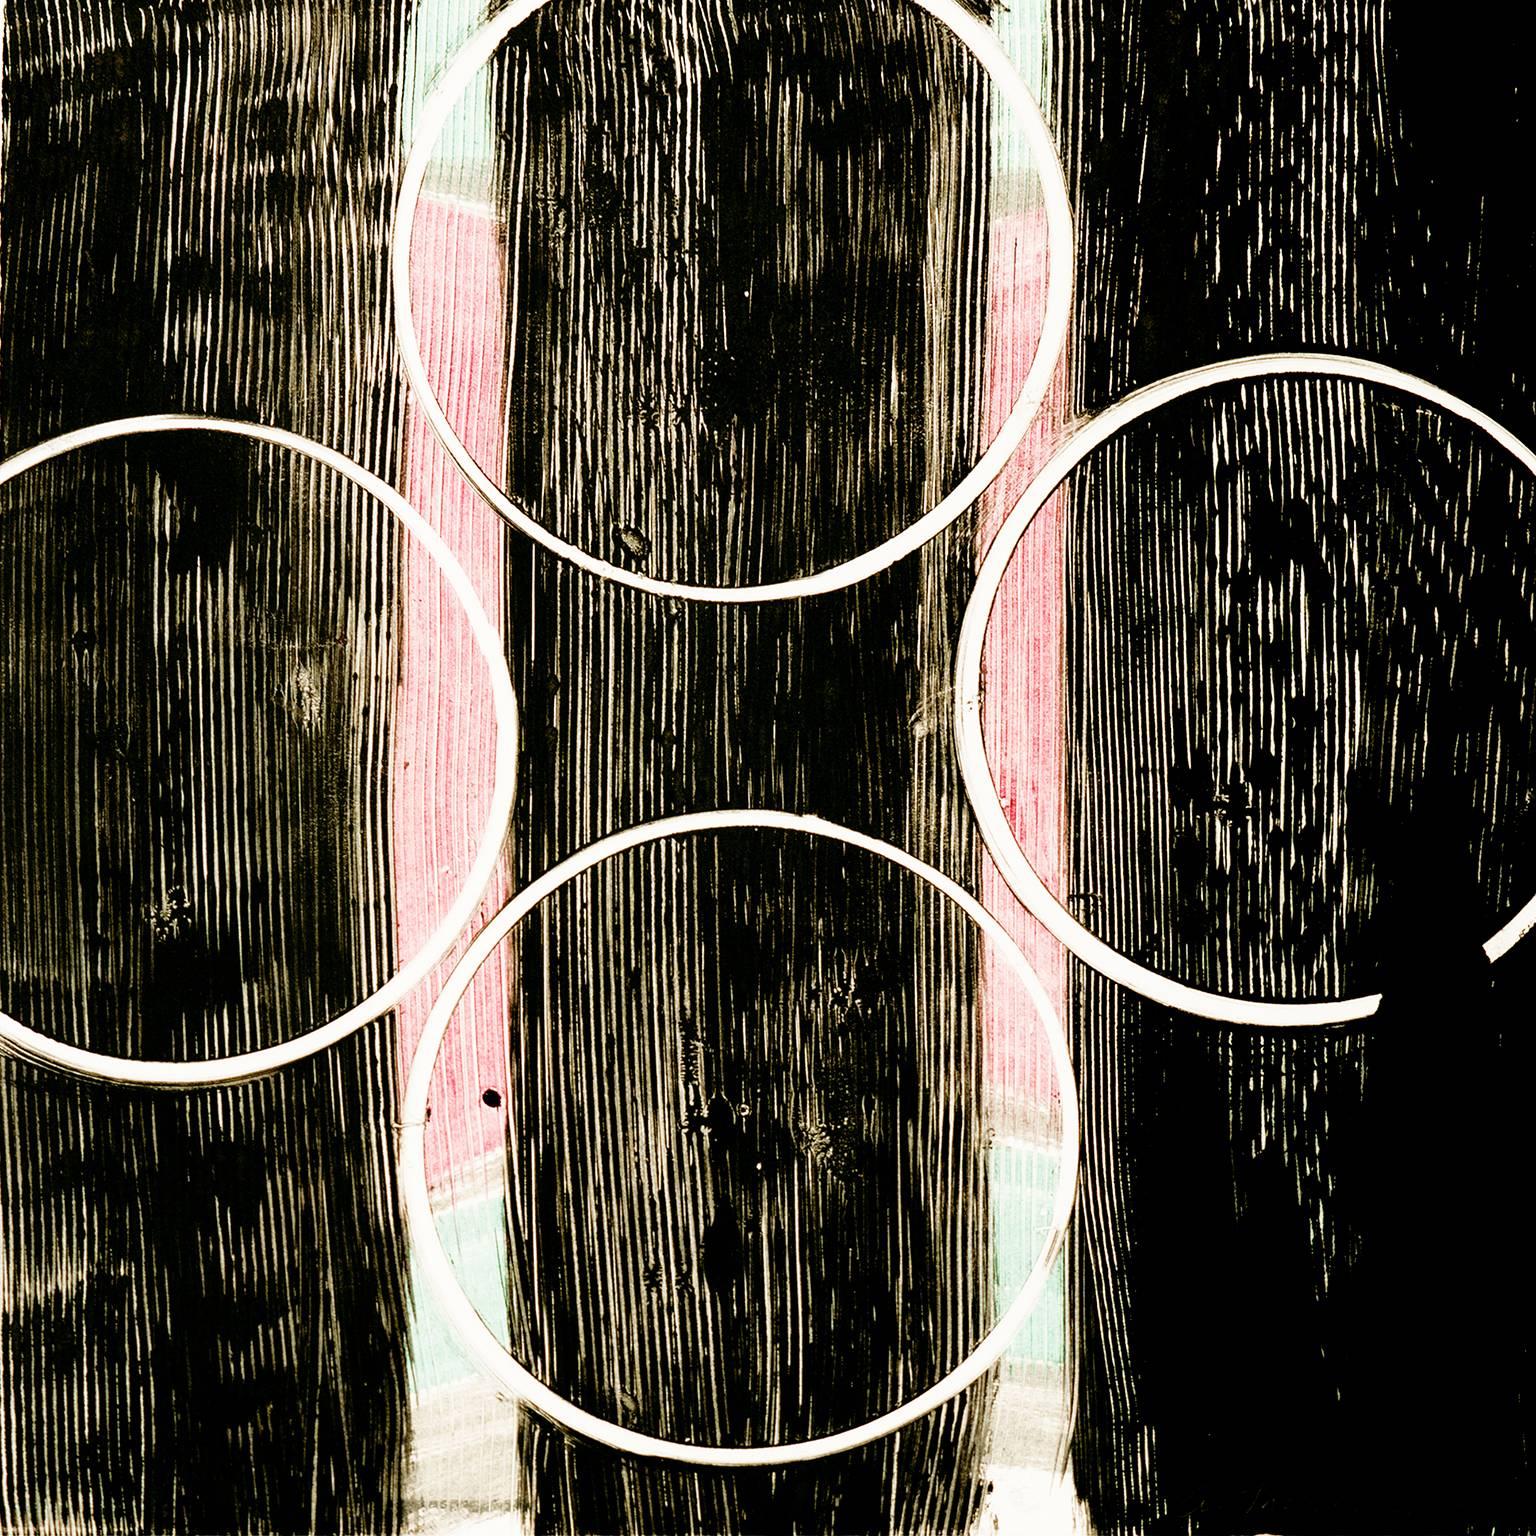 Anita Thacher Abstract Print - "Effigy Two", painterly abstract monoprint, pink, black, white, circles, strips.